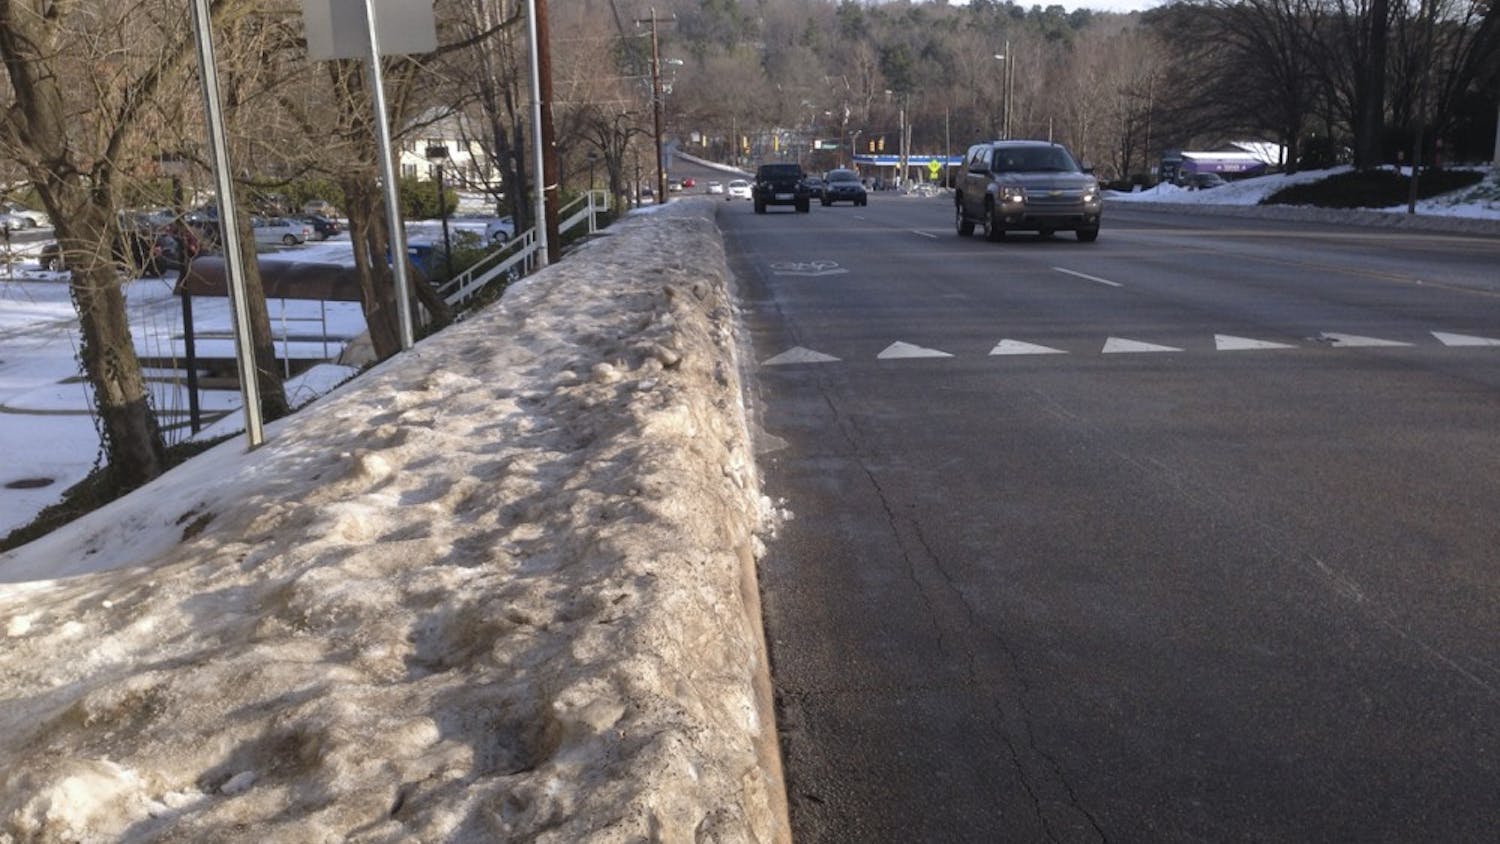 A view towards Hillsborough Drive on Martin Luther King Jr. Blvd. On Tuesday morning, the road was clear, and the sidewalks remained obstructed.